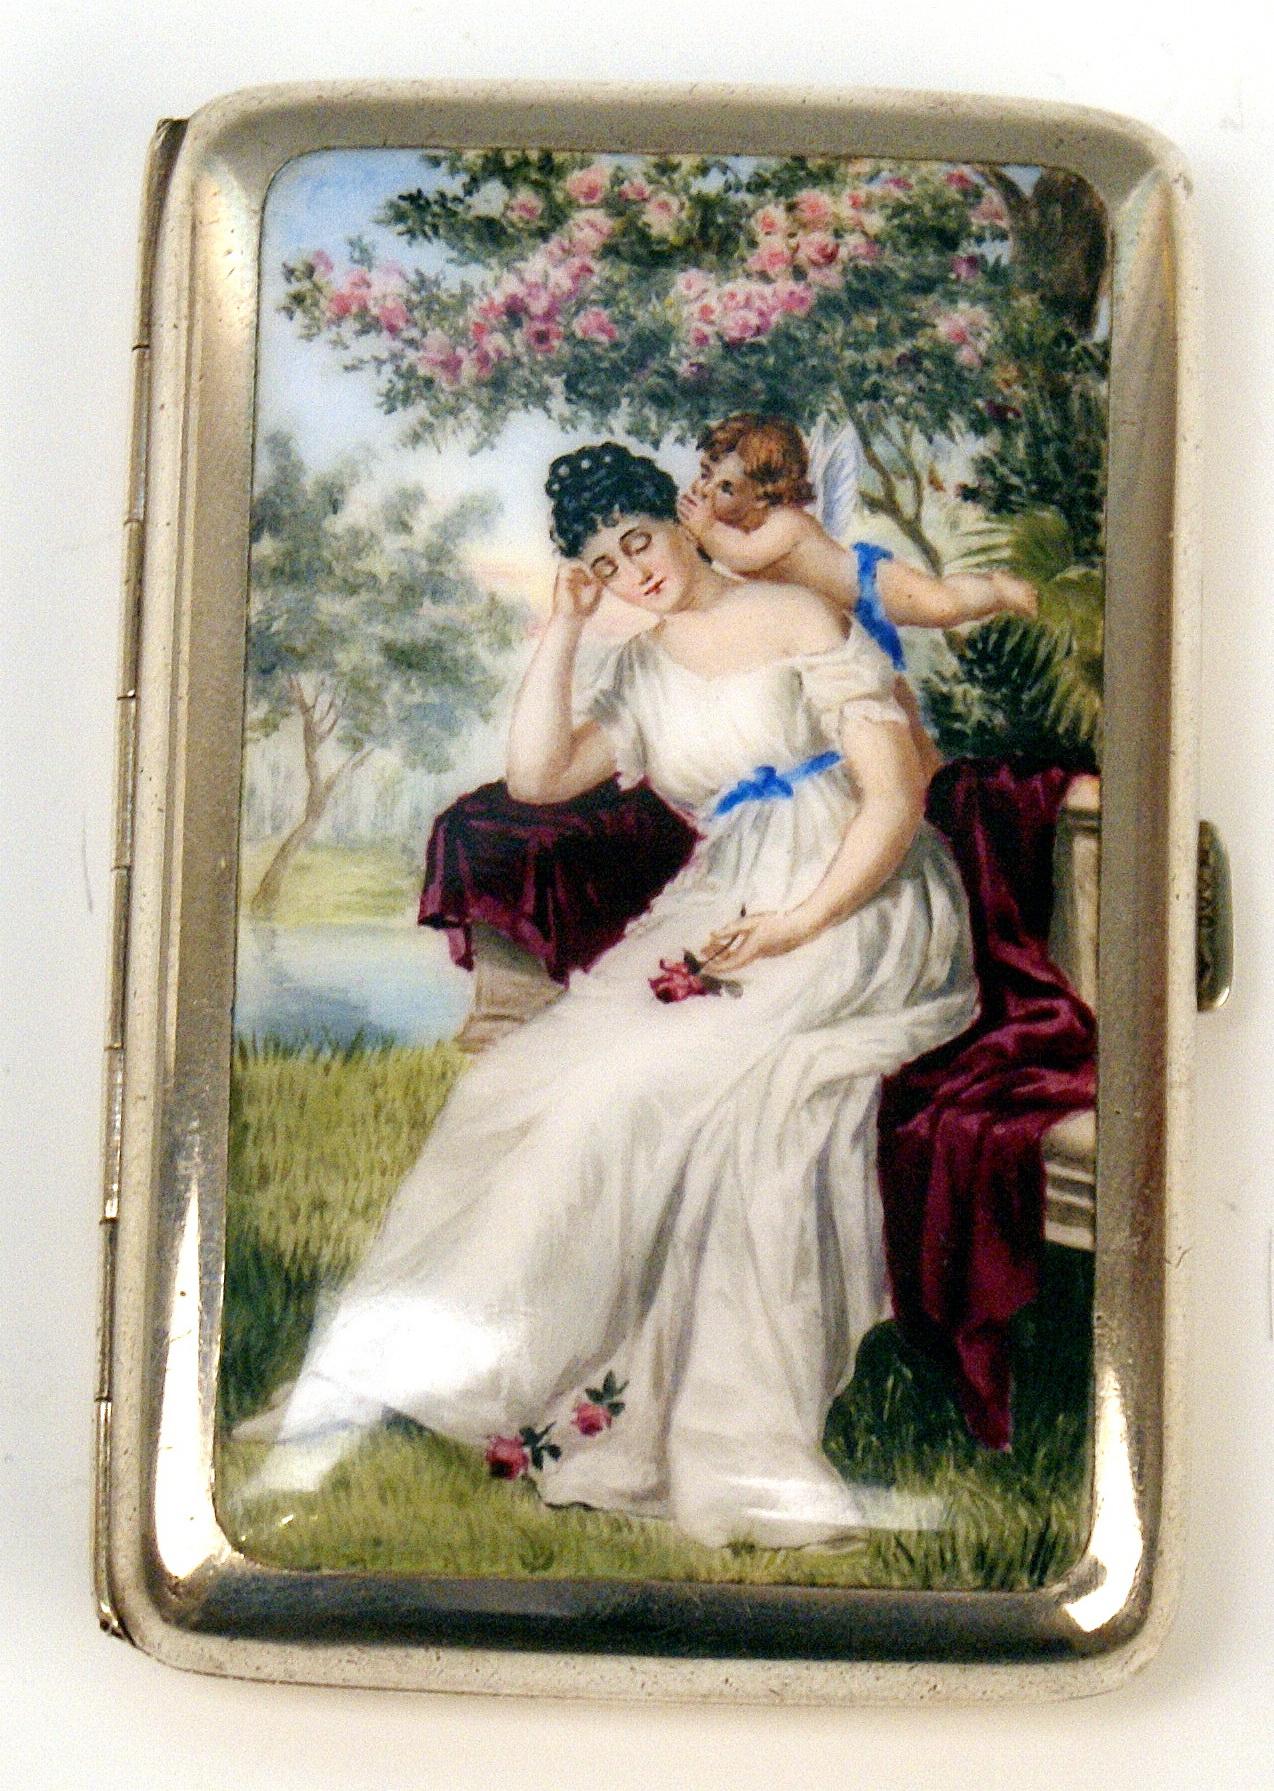 Stunning silver 800 cigarette box / case with enamel painting covering lid:
View of a lady having fallen asleeep - situated in a garden, watched by a winged cherub.

The lid is decorated with a most lovely enamel picture as mentioned